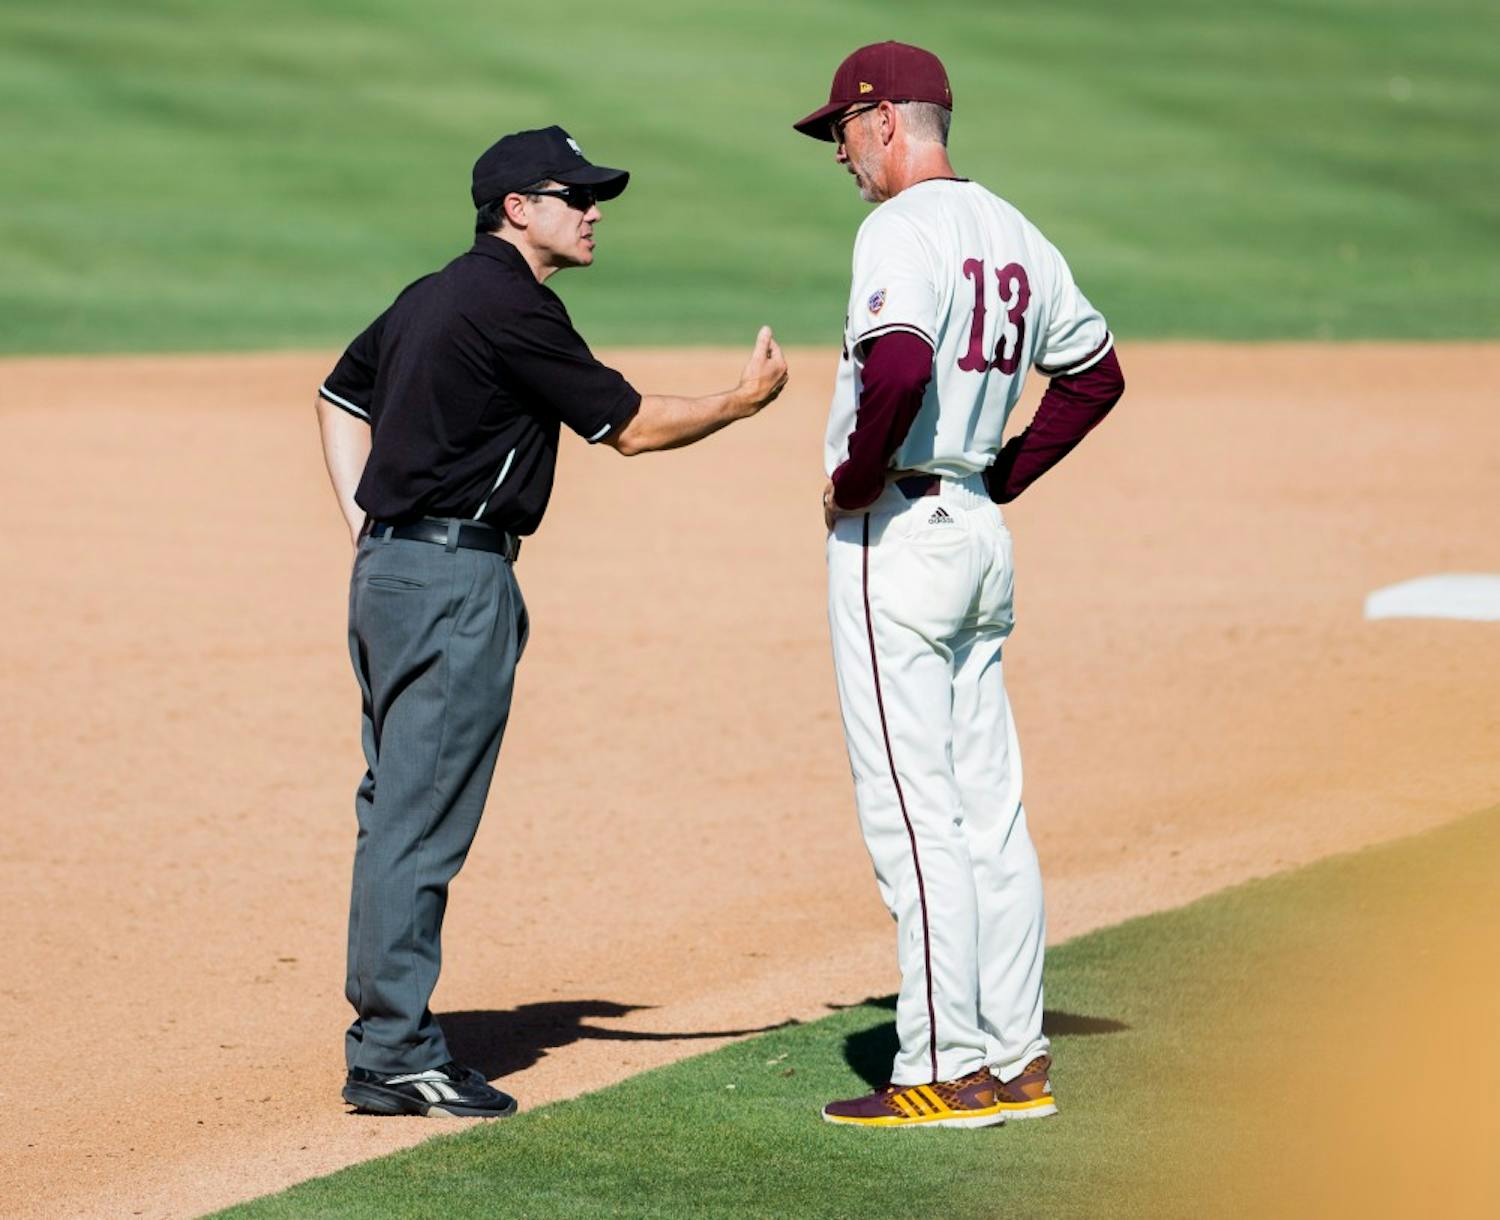 Head coach Tracy Smith argues a call with an umpire during a game against USC on Sunday, May 29, 2016, at Phoenix Municipal Stadium in Phoenix. The Trojans defeated the Sun Devils 31-9.